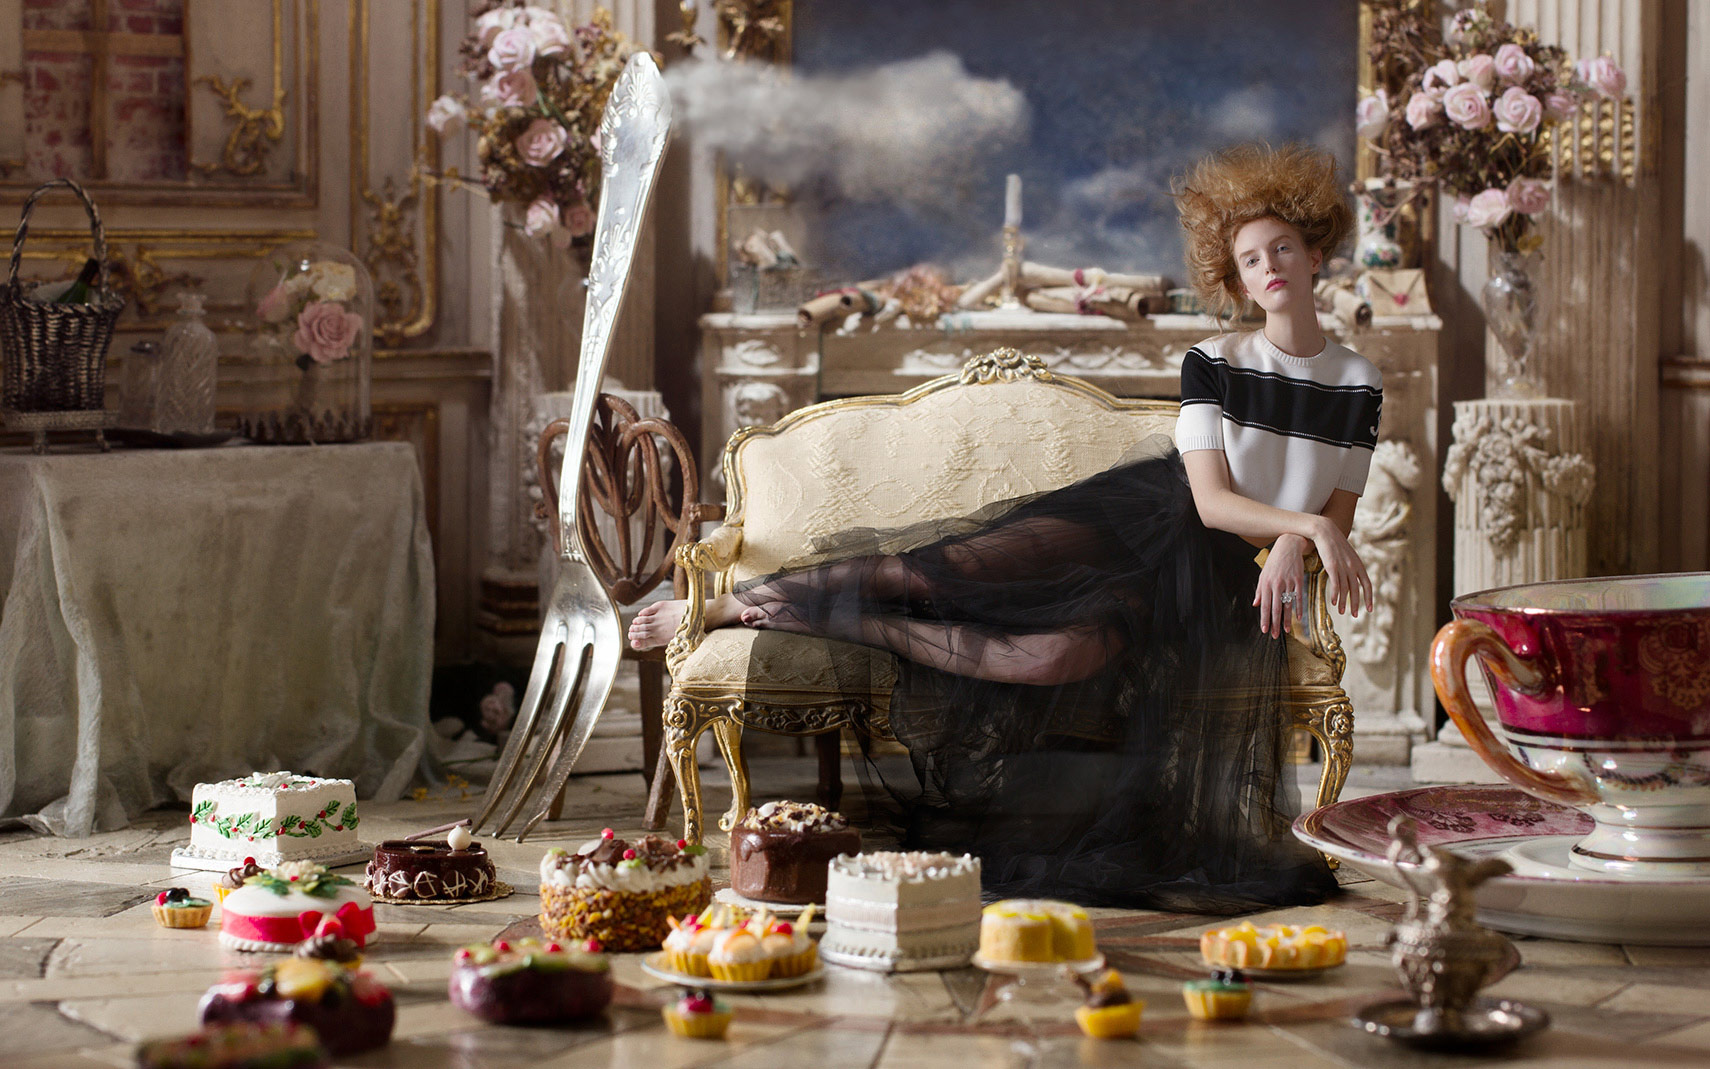 A blonde-haired fashion model reclining on an Louis XVI sofa in an elegant baroque interior surrounded by a display of pastries and cakes on the tile floor and also a giant sterling silver fork and giant antique teacup.